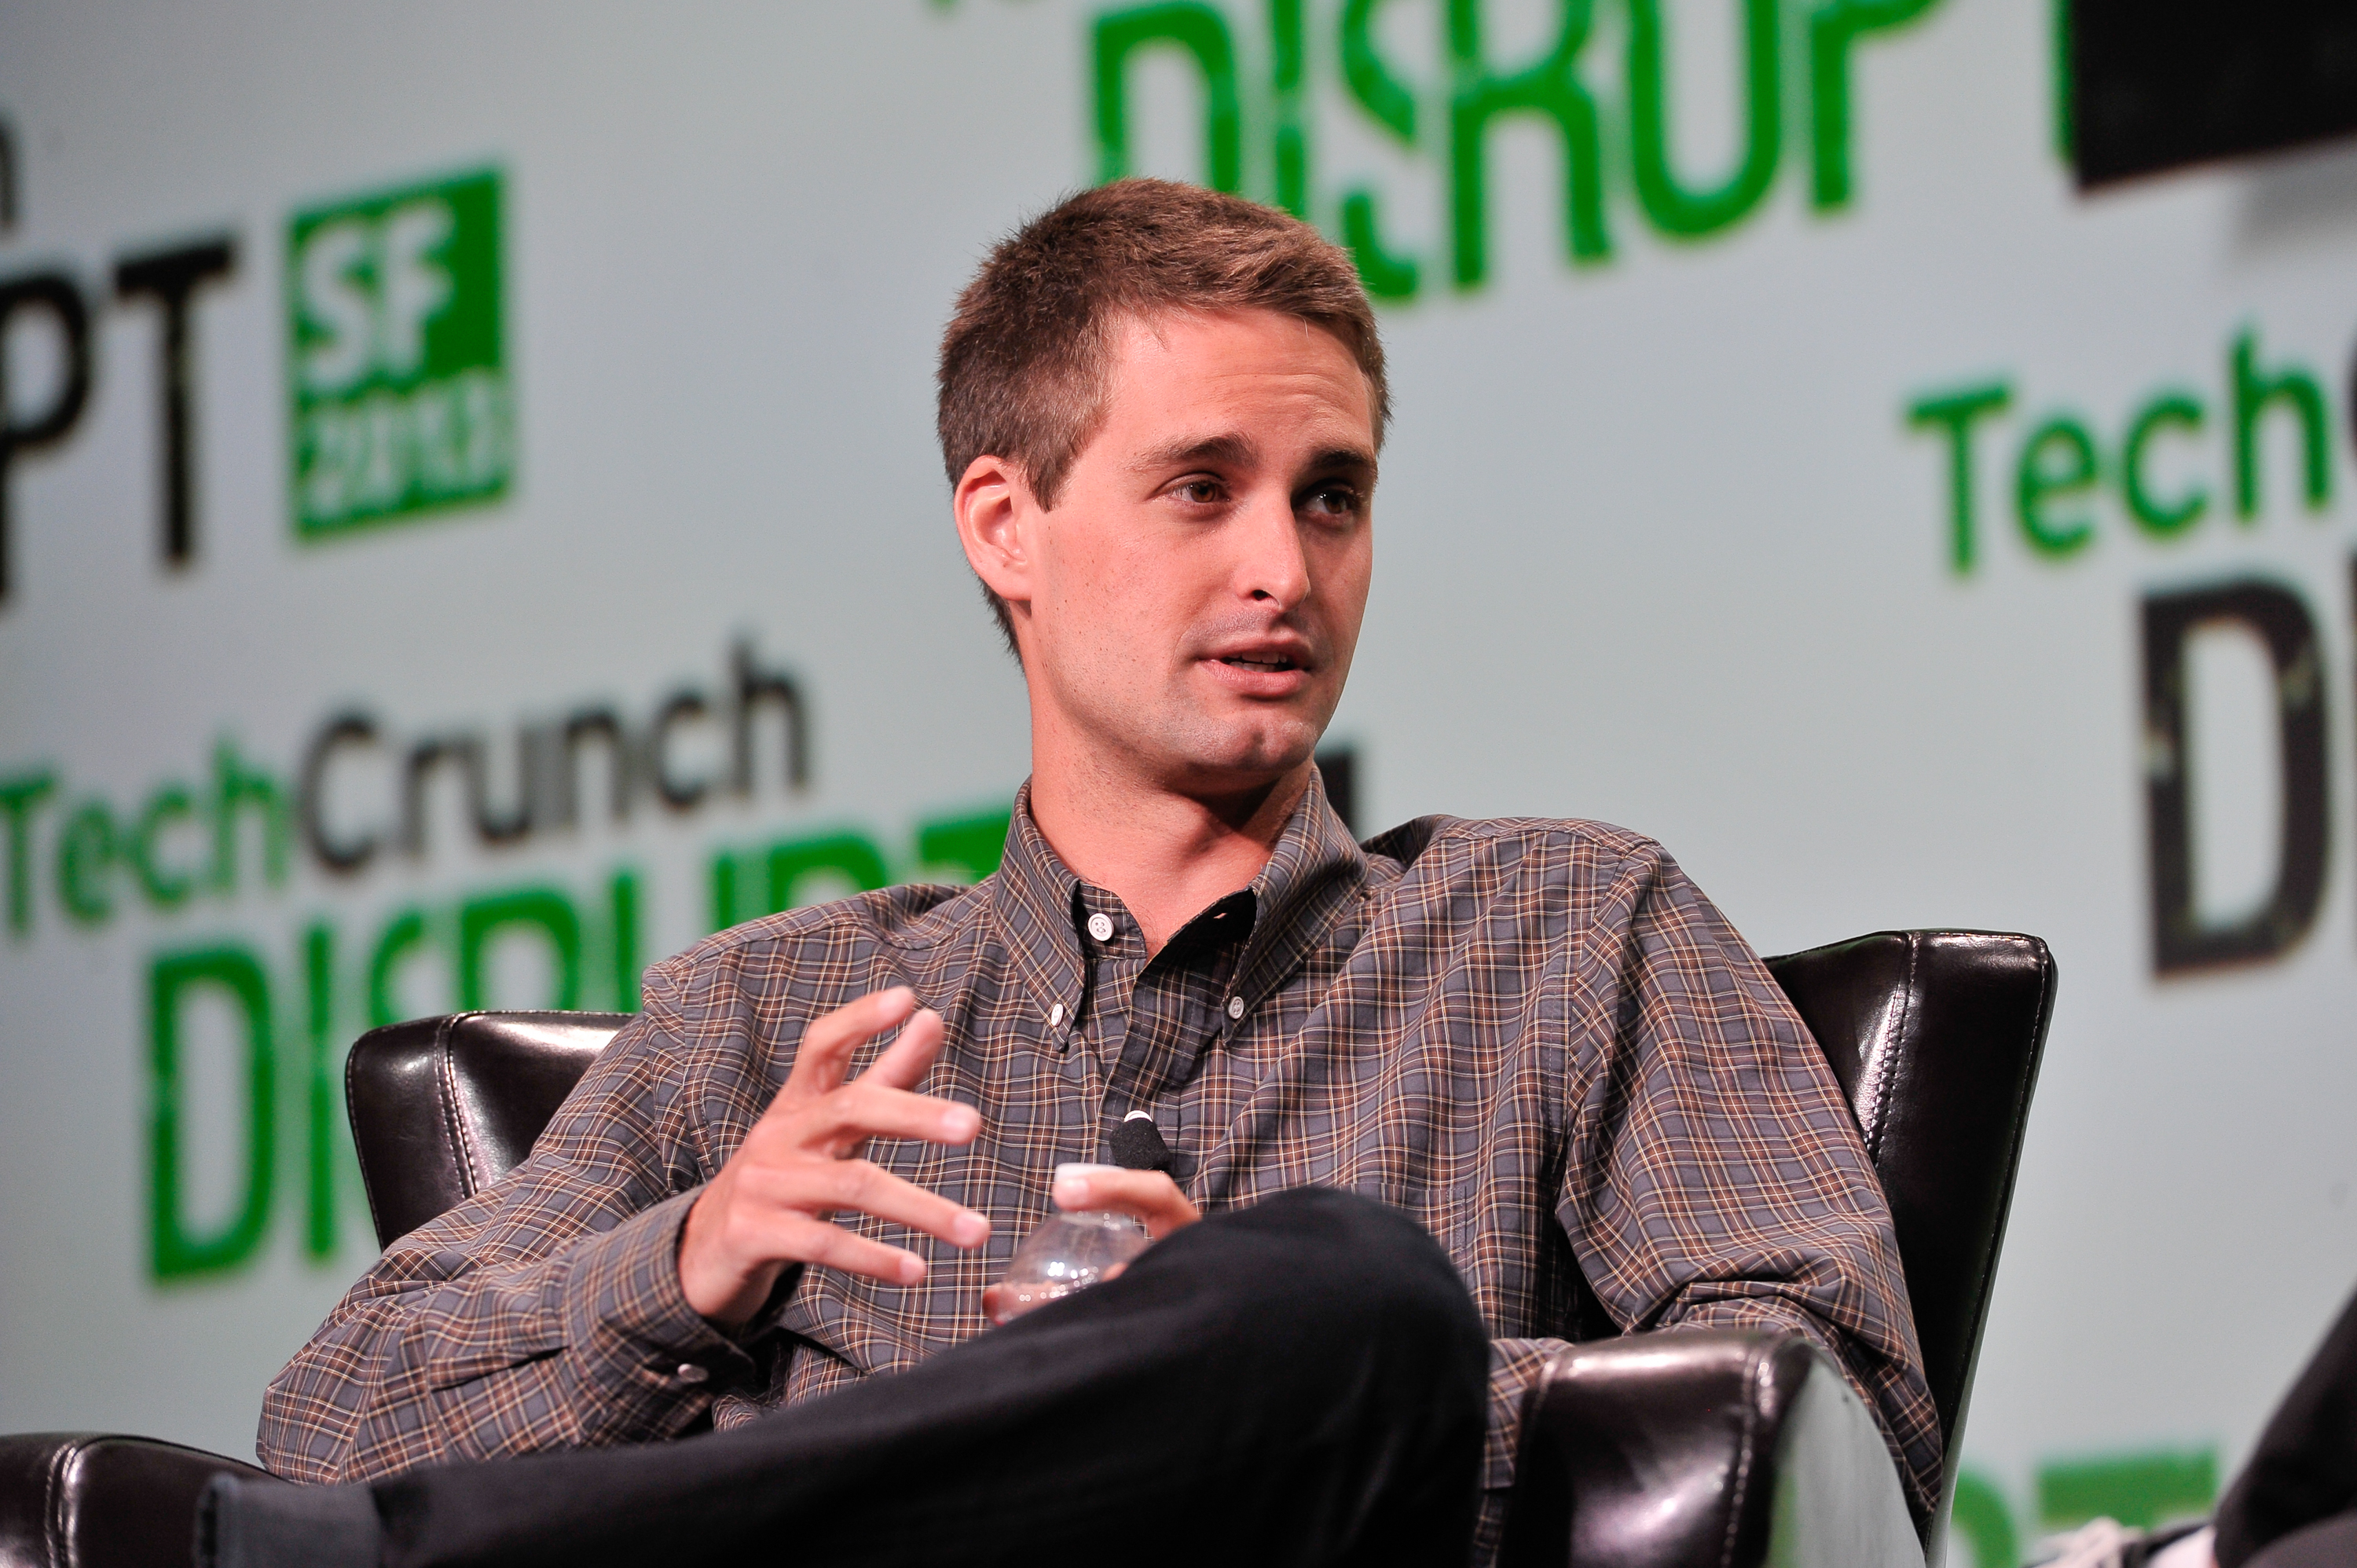 Evan Spiegel of Snapchat attends TechCruch Disrupt SF 2013 at San Francisco Design Center on Sept. 9, 2013 in San Francisco. (Steve Jenning—Getty Images)